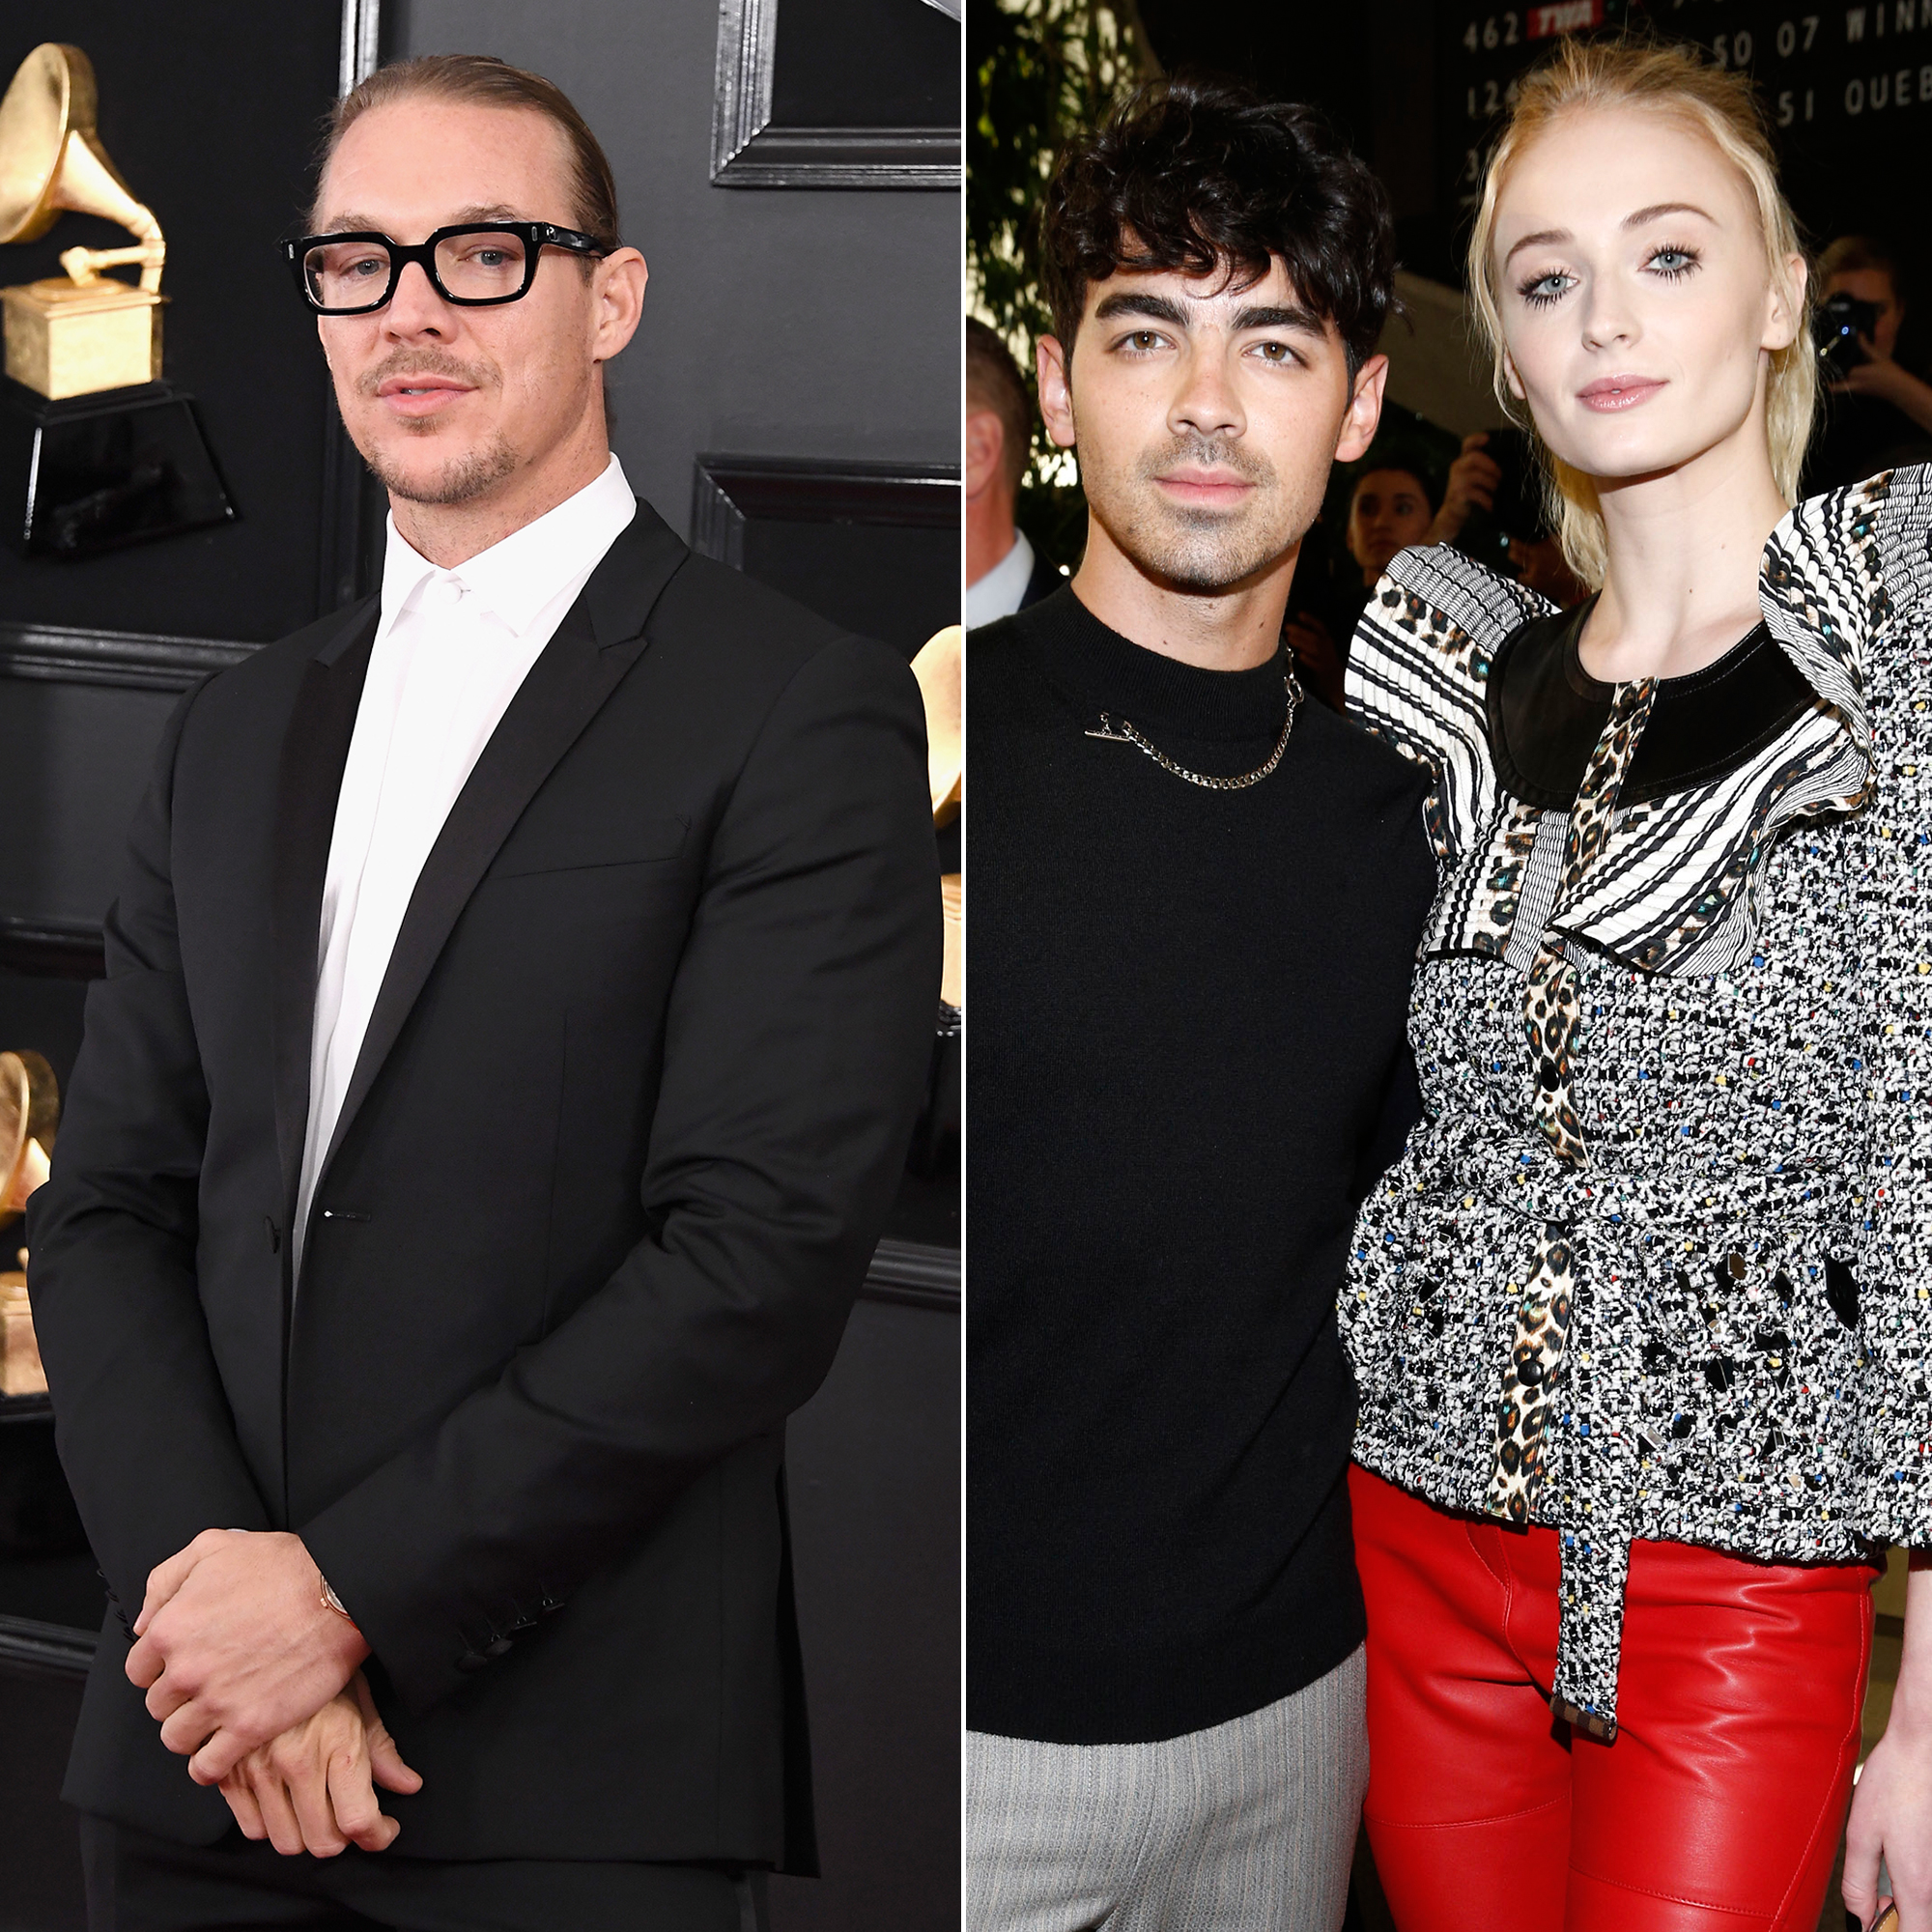 We Came For Sophie Turner-Joe Jonas' Wedding Pic, Stayed For The